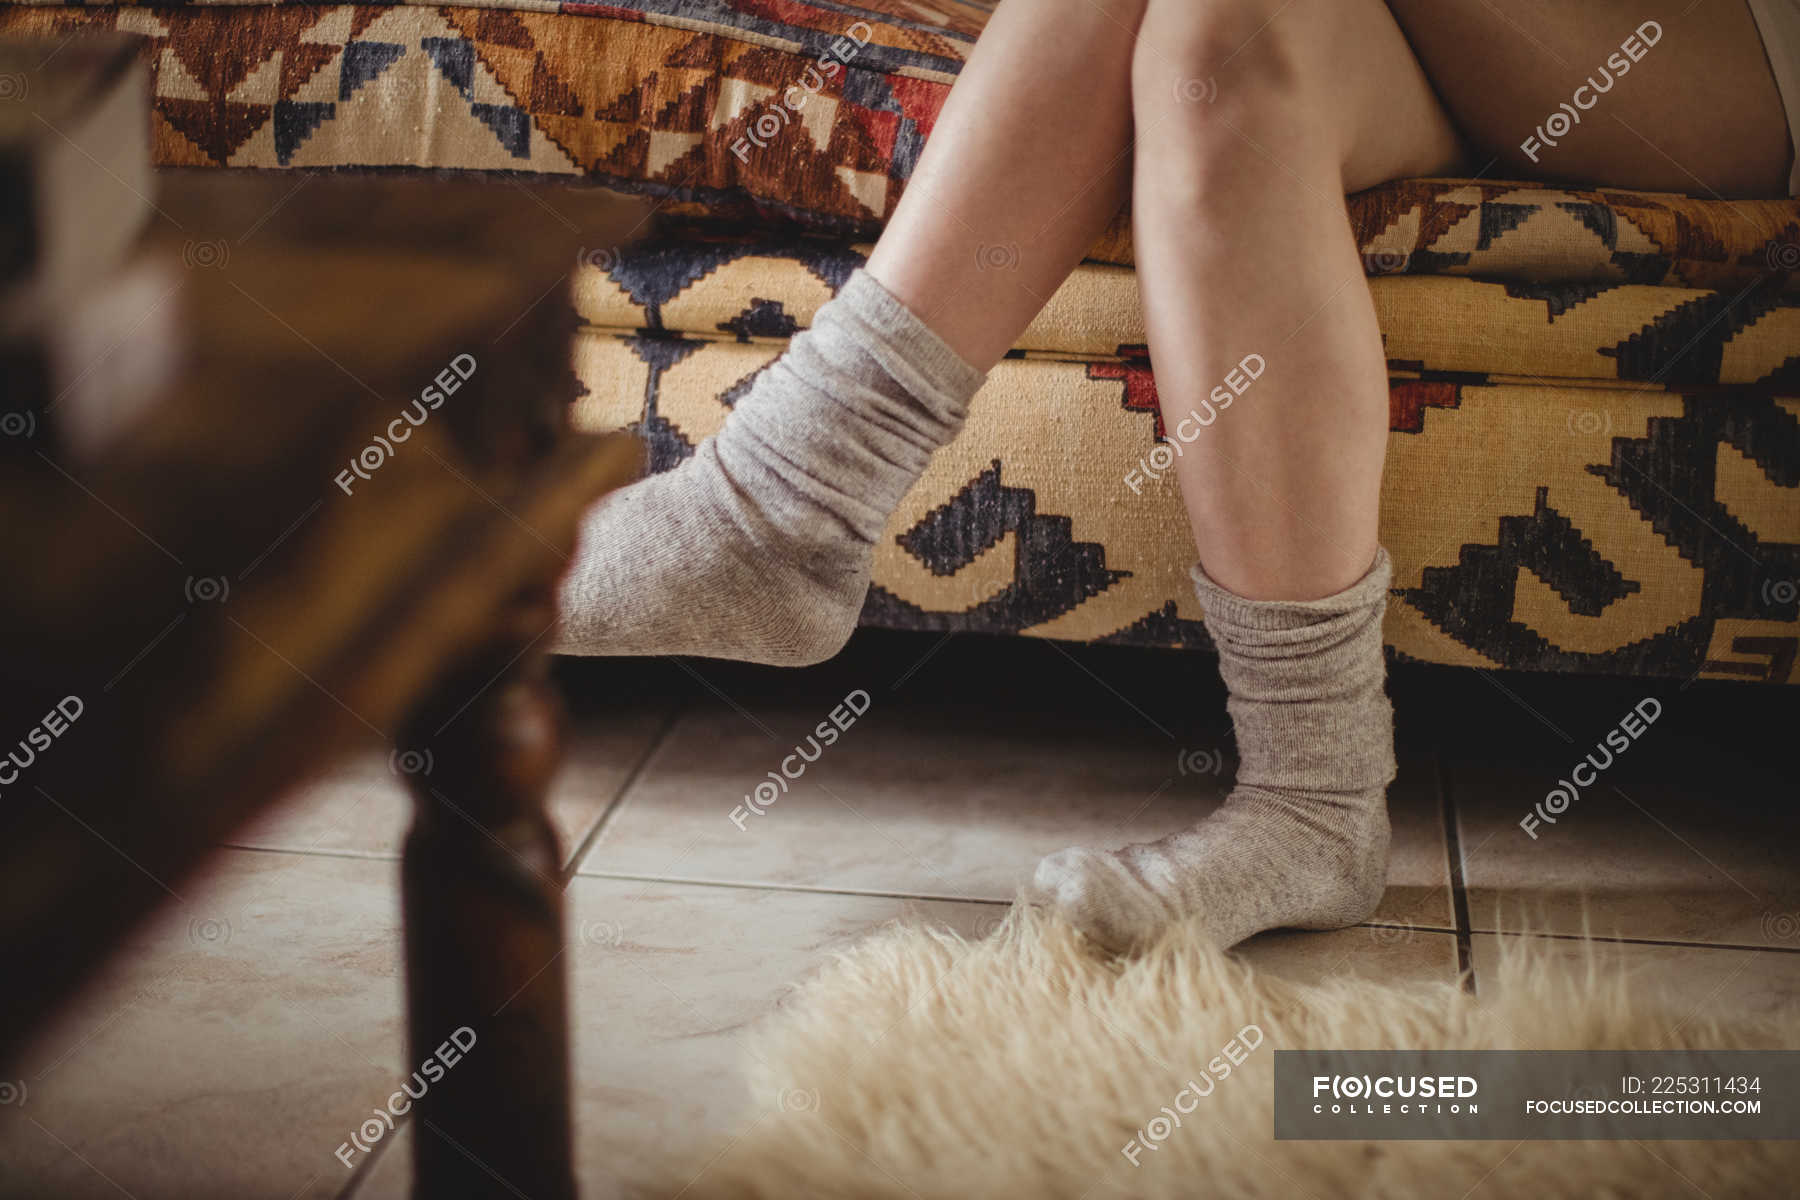 Woman Wearing Socks Sitting On Sofa With Her Legs Crossed At Home